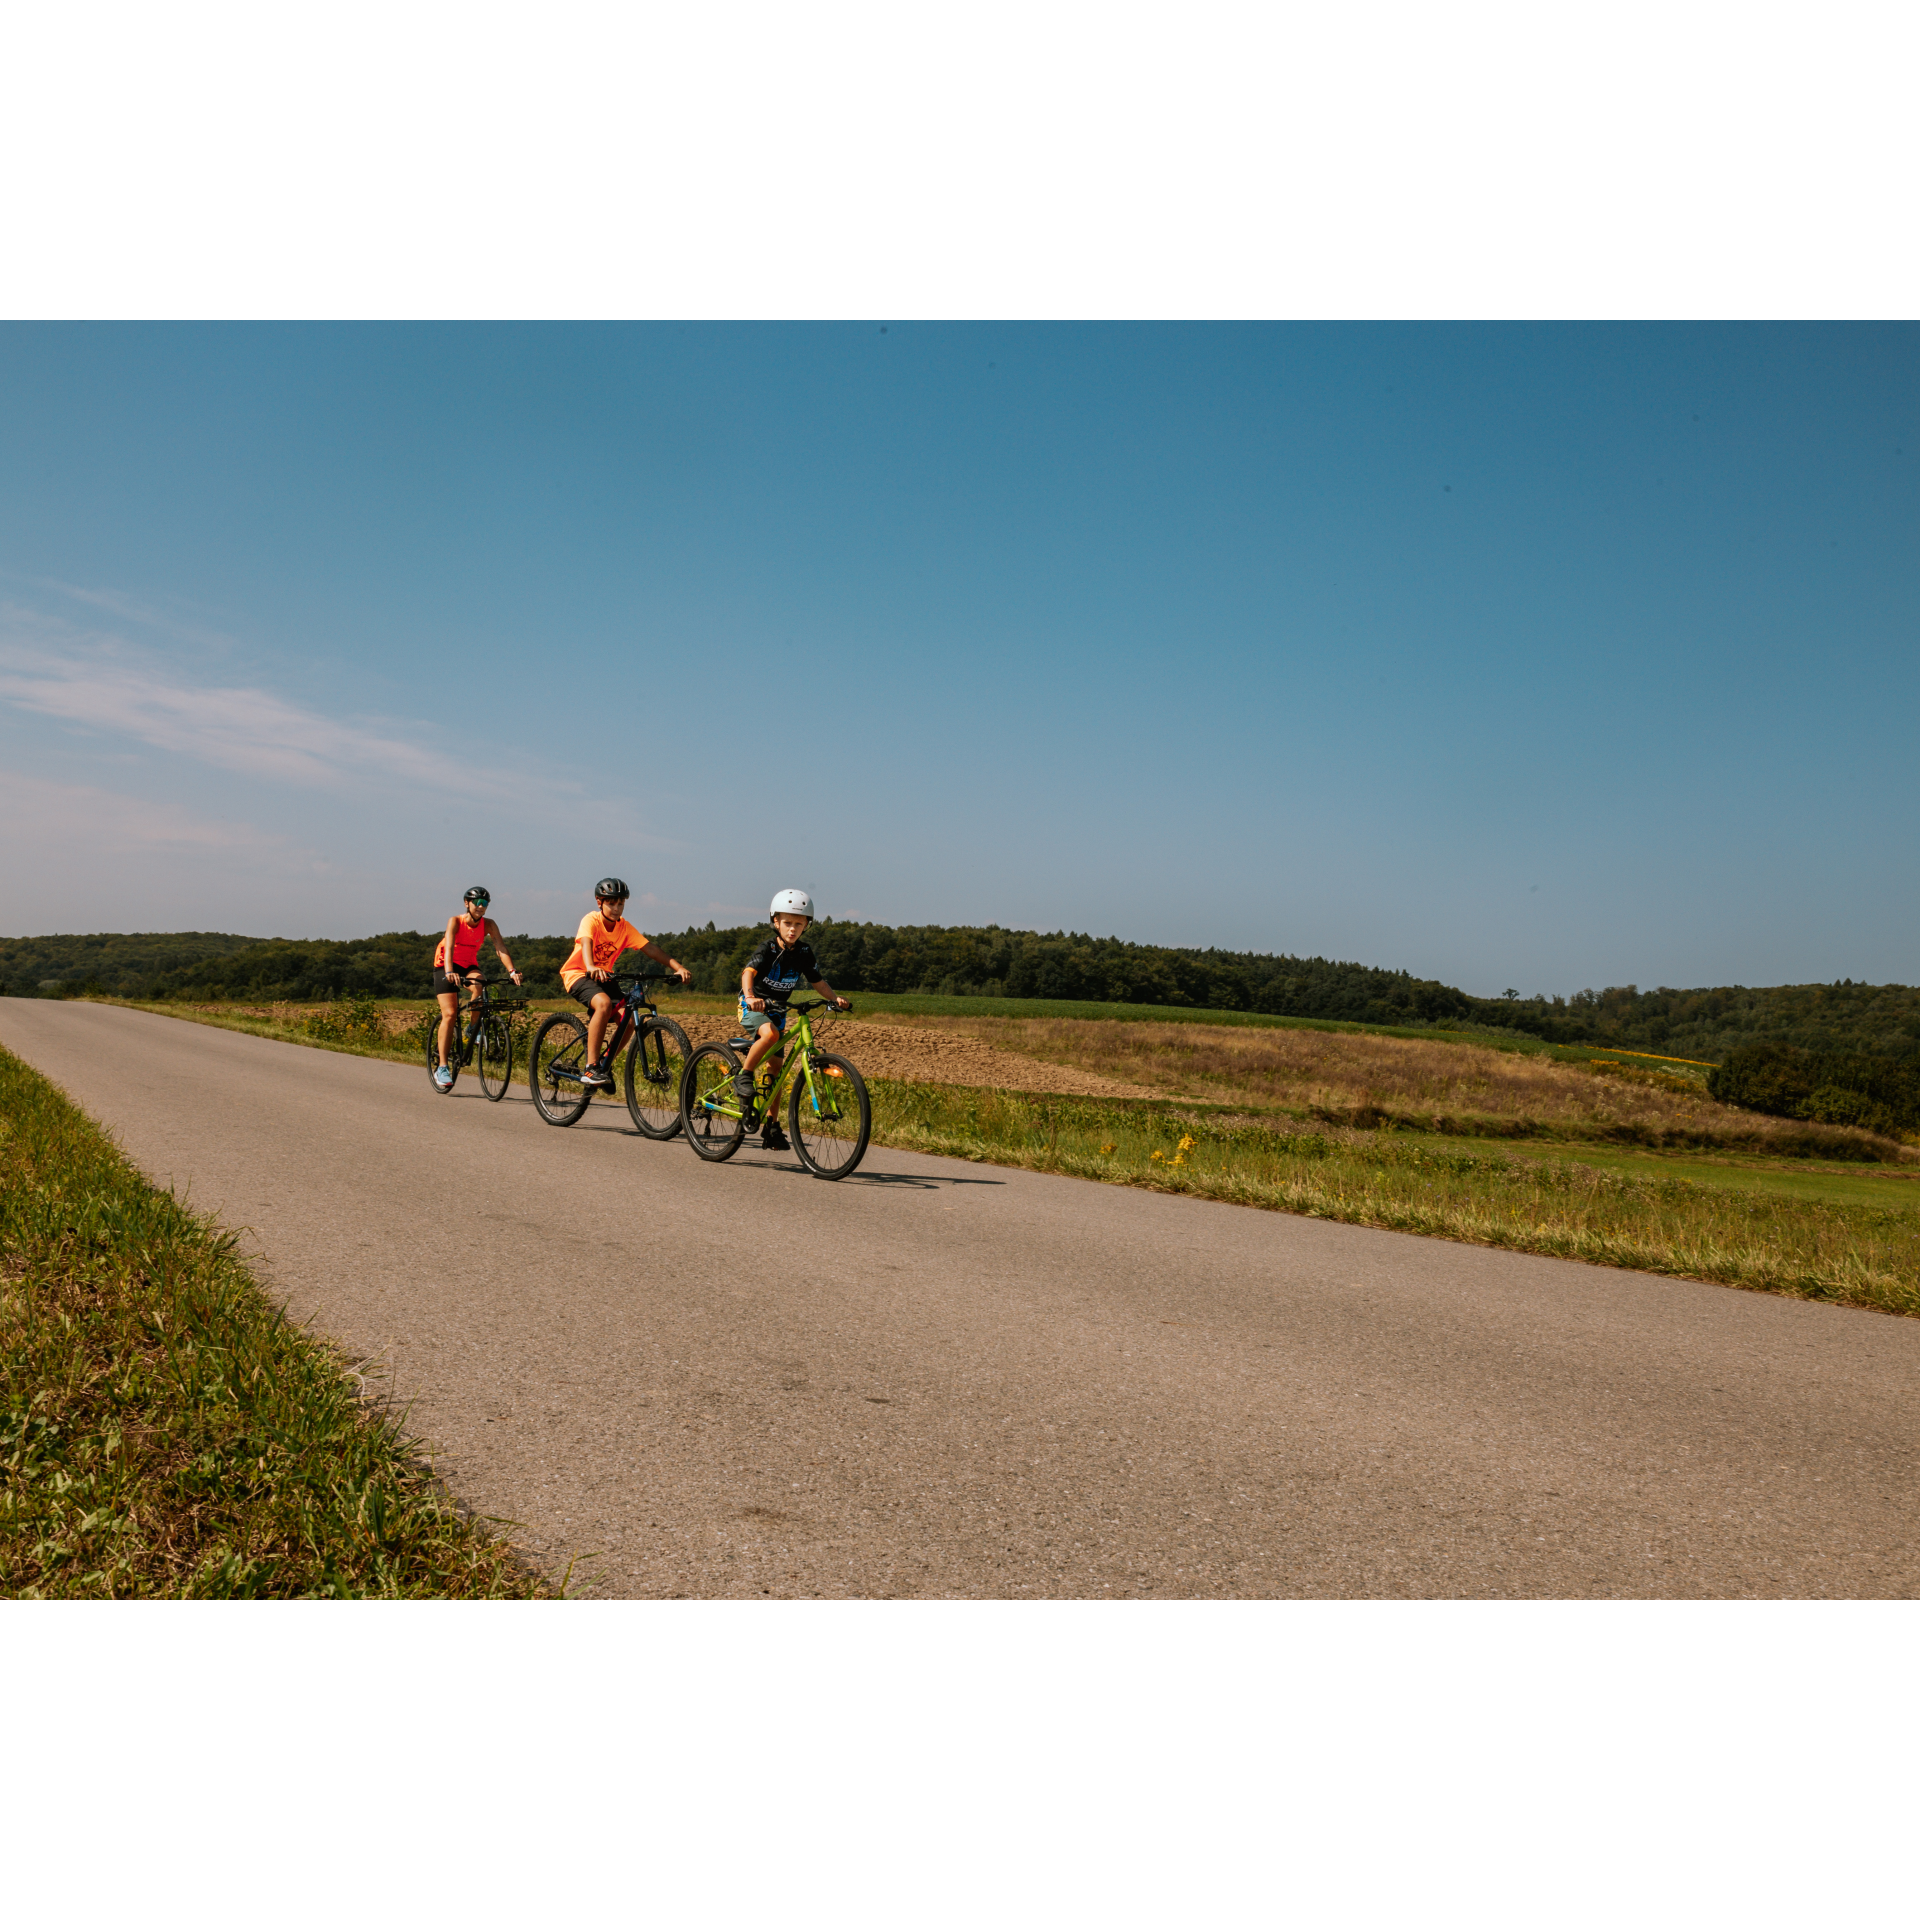 Cyclists in an open field